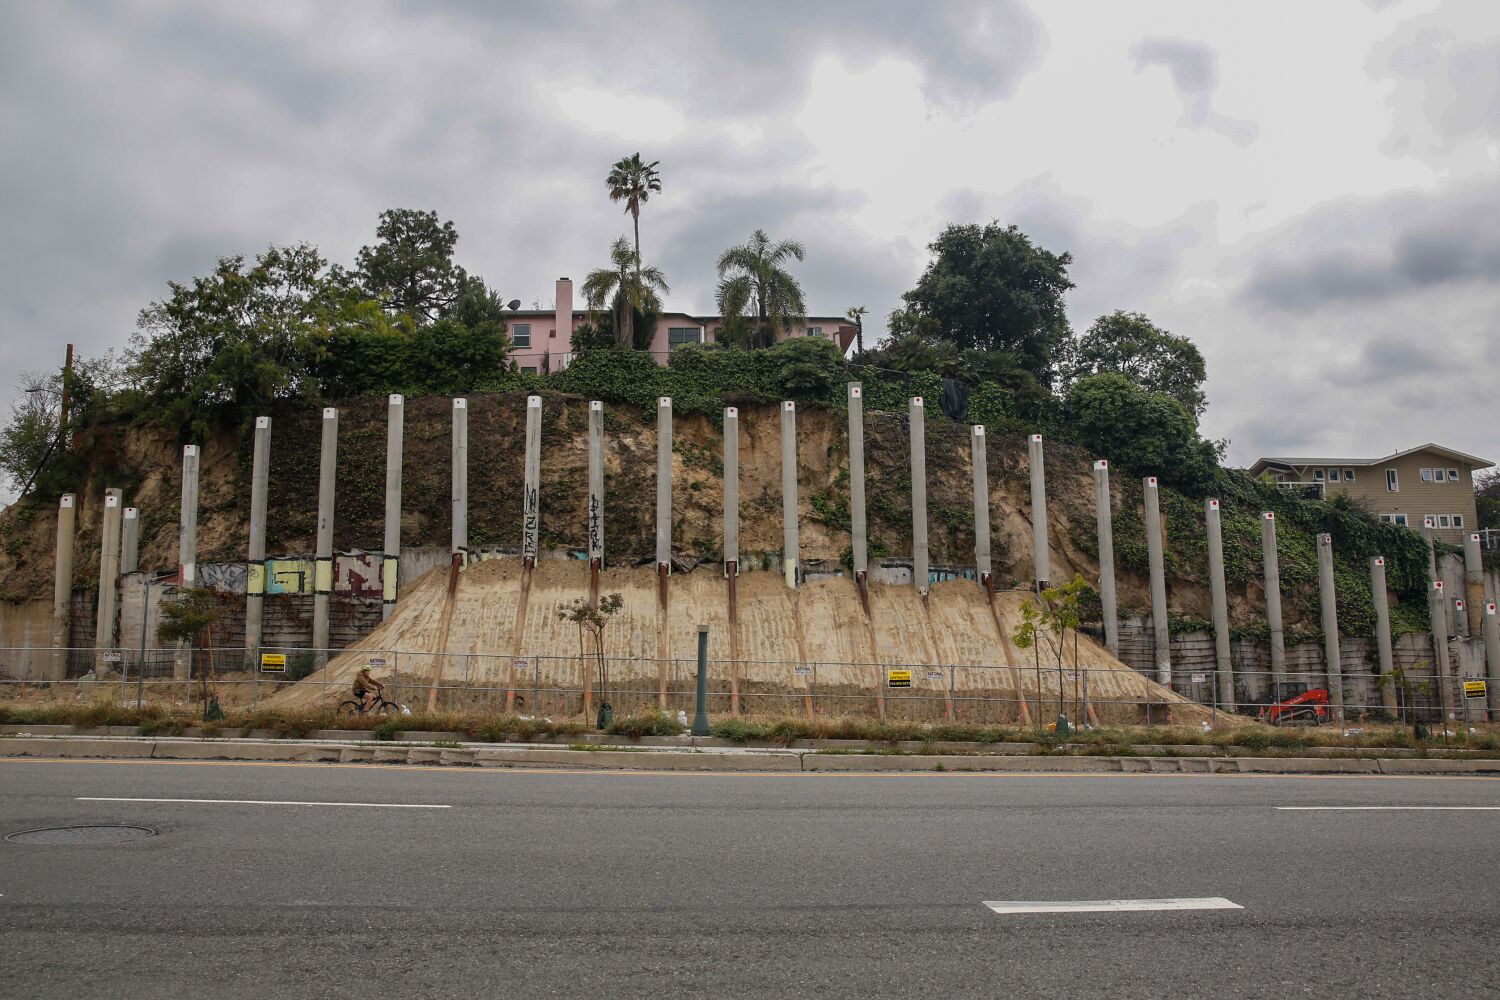 Eagle Rock's 'Pillarhenge' will finally disappear. In its place, a giant boat?